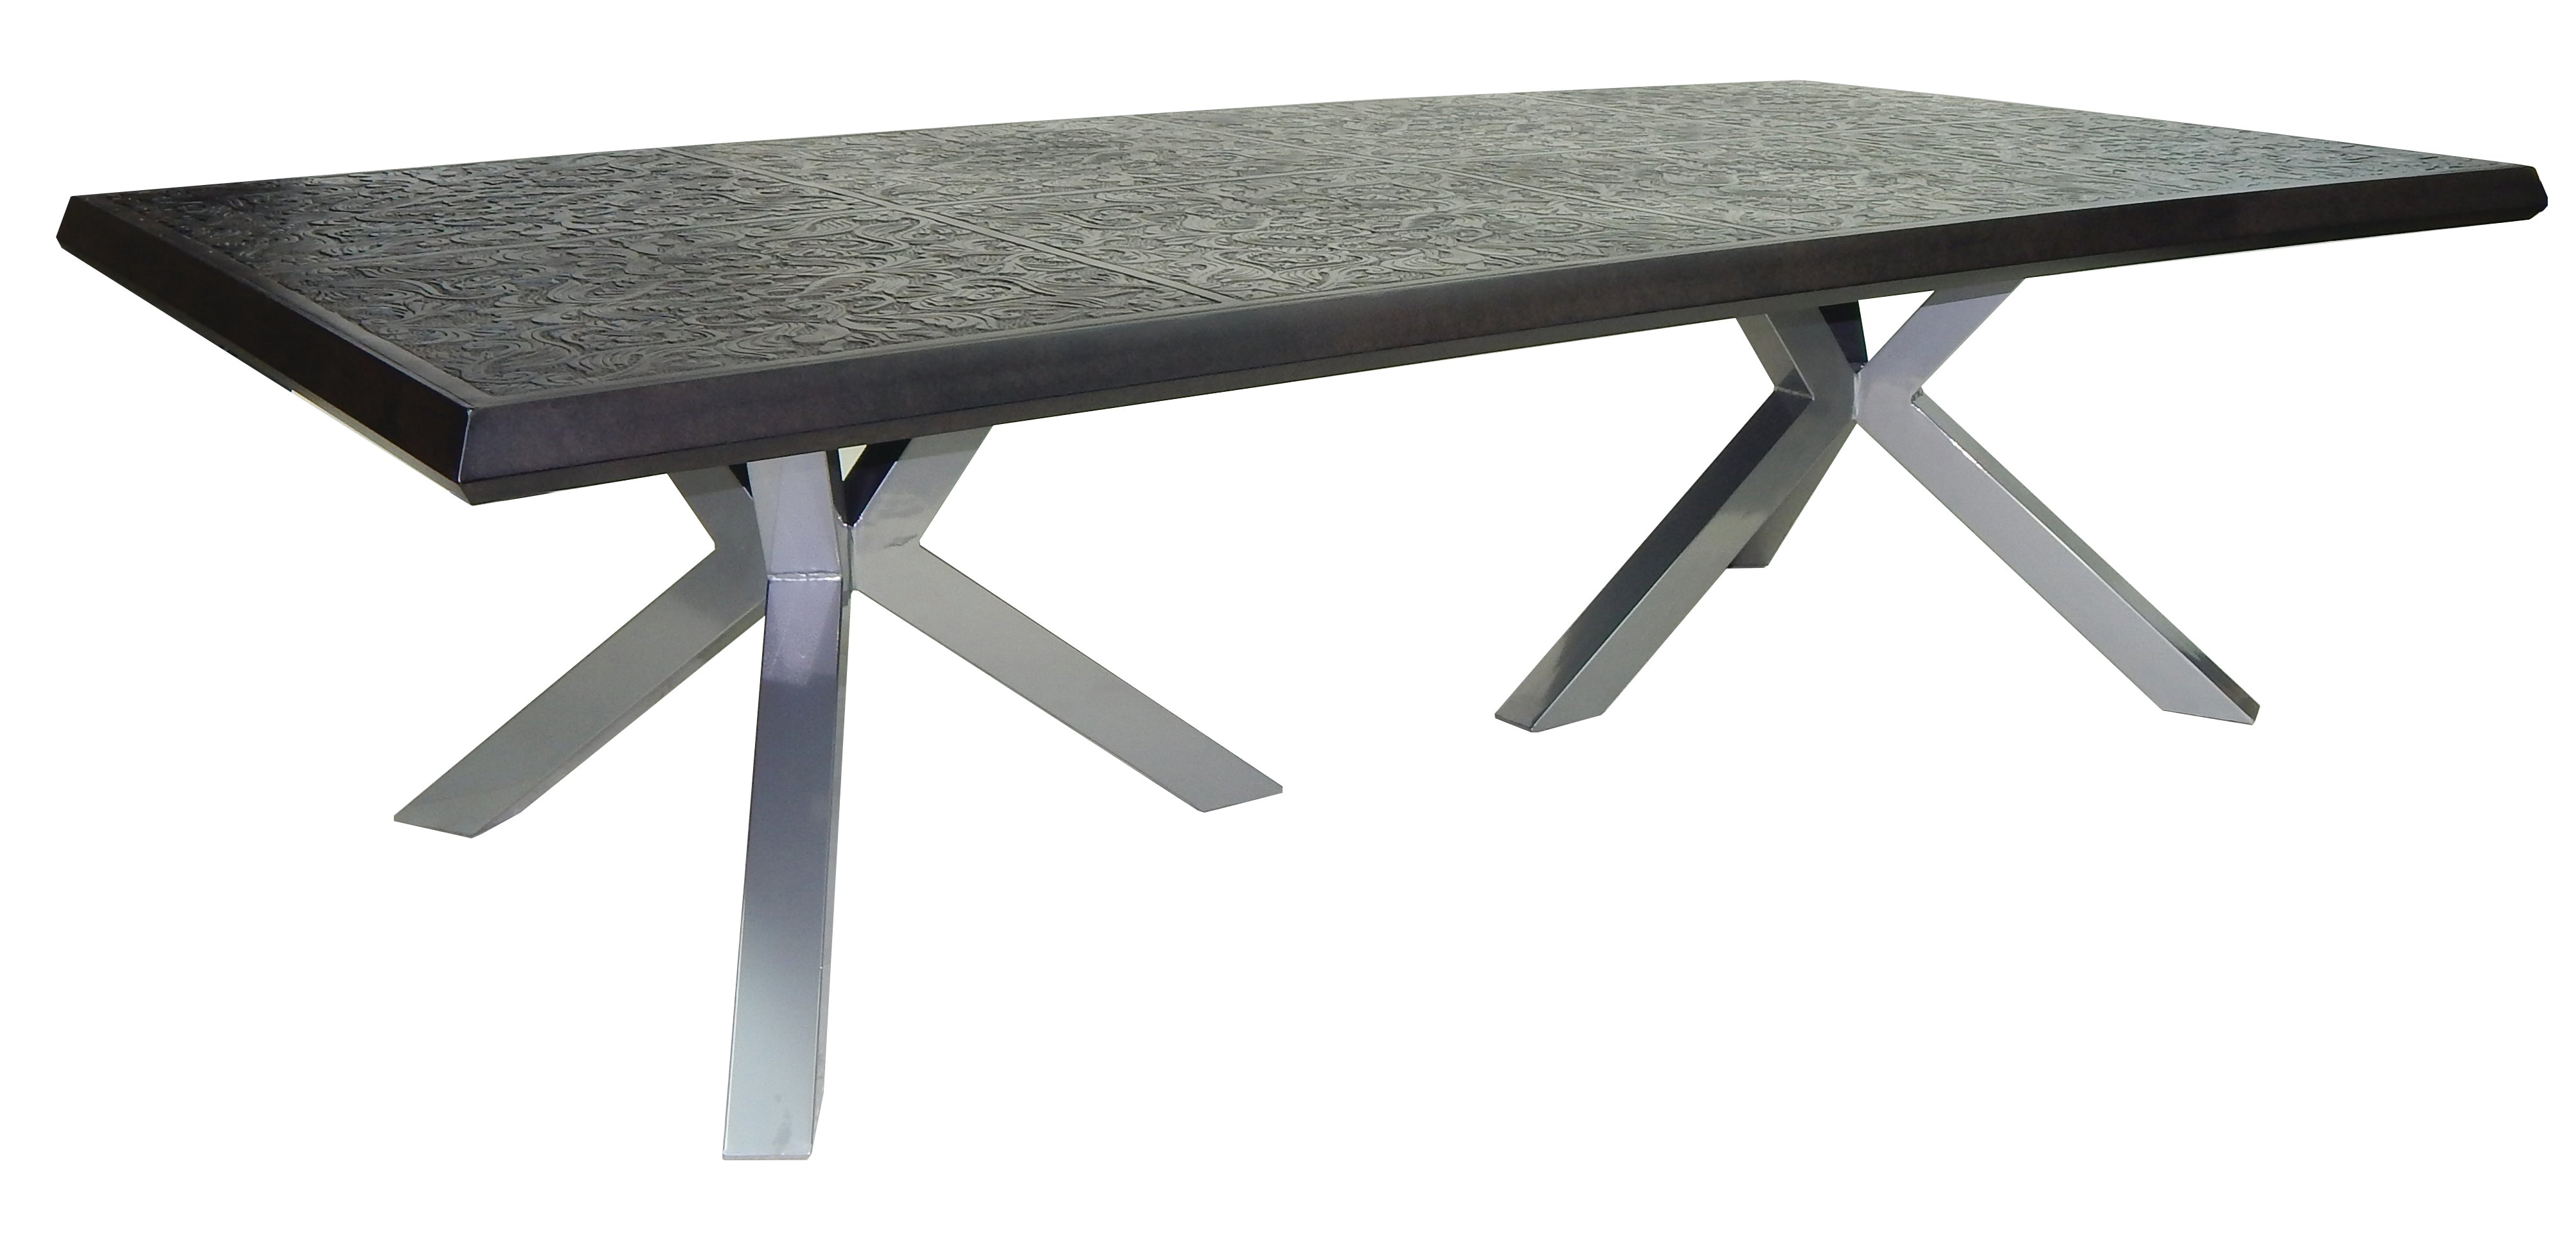 Altra 49" x 108" Rectangle Dining Table By Castelle